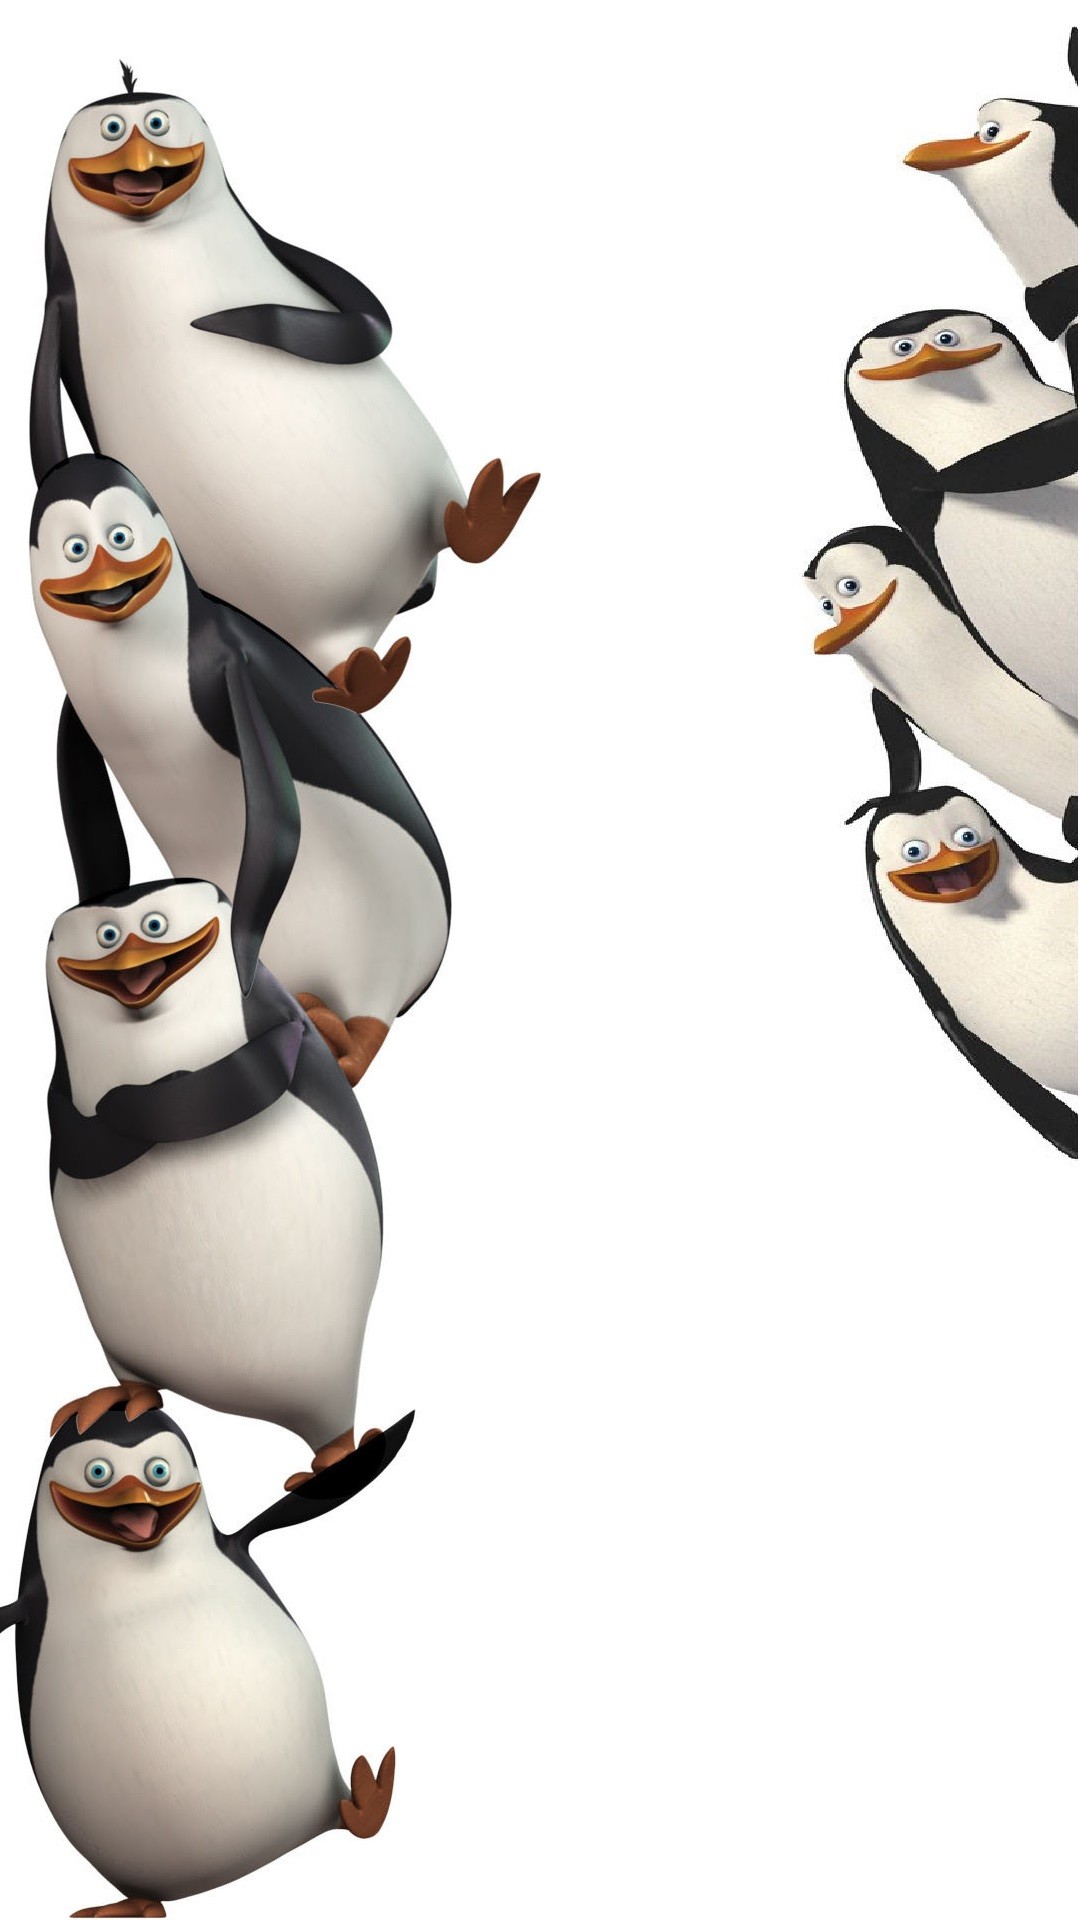 1080x1920 Penguins Of Madagascar Wallpapers Group with items